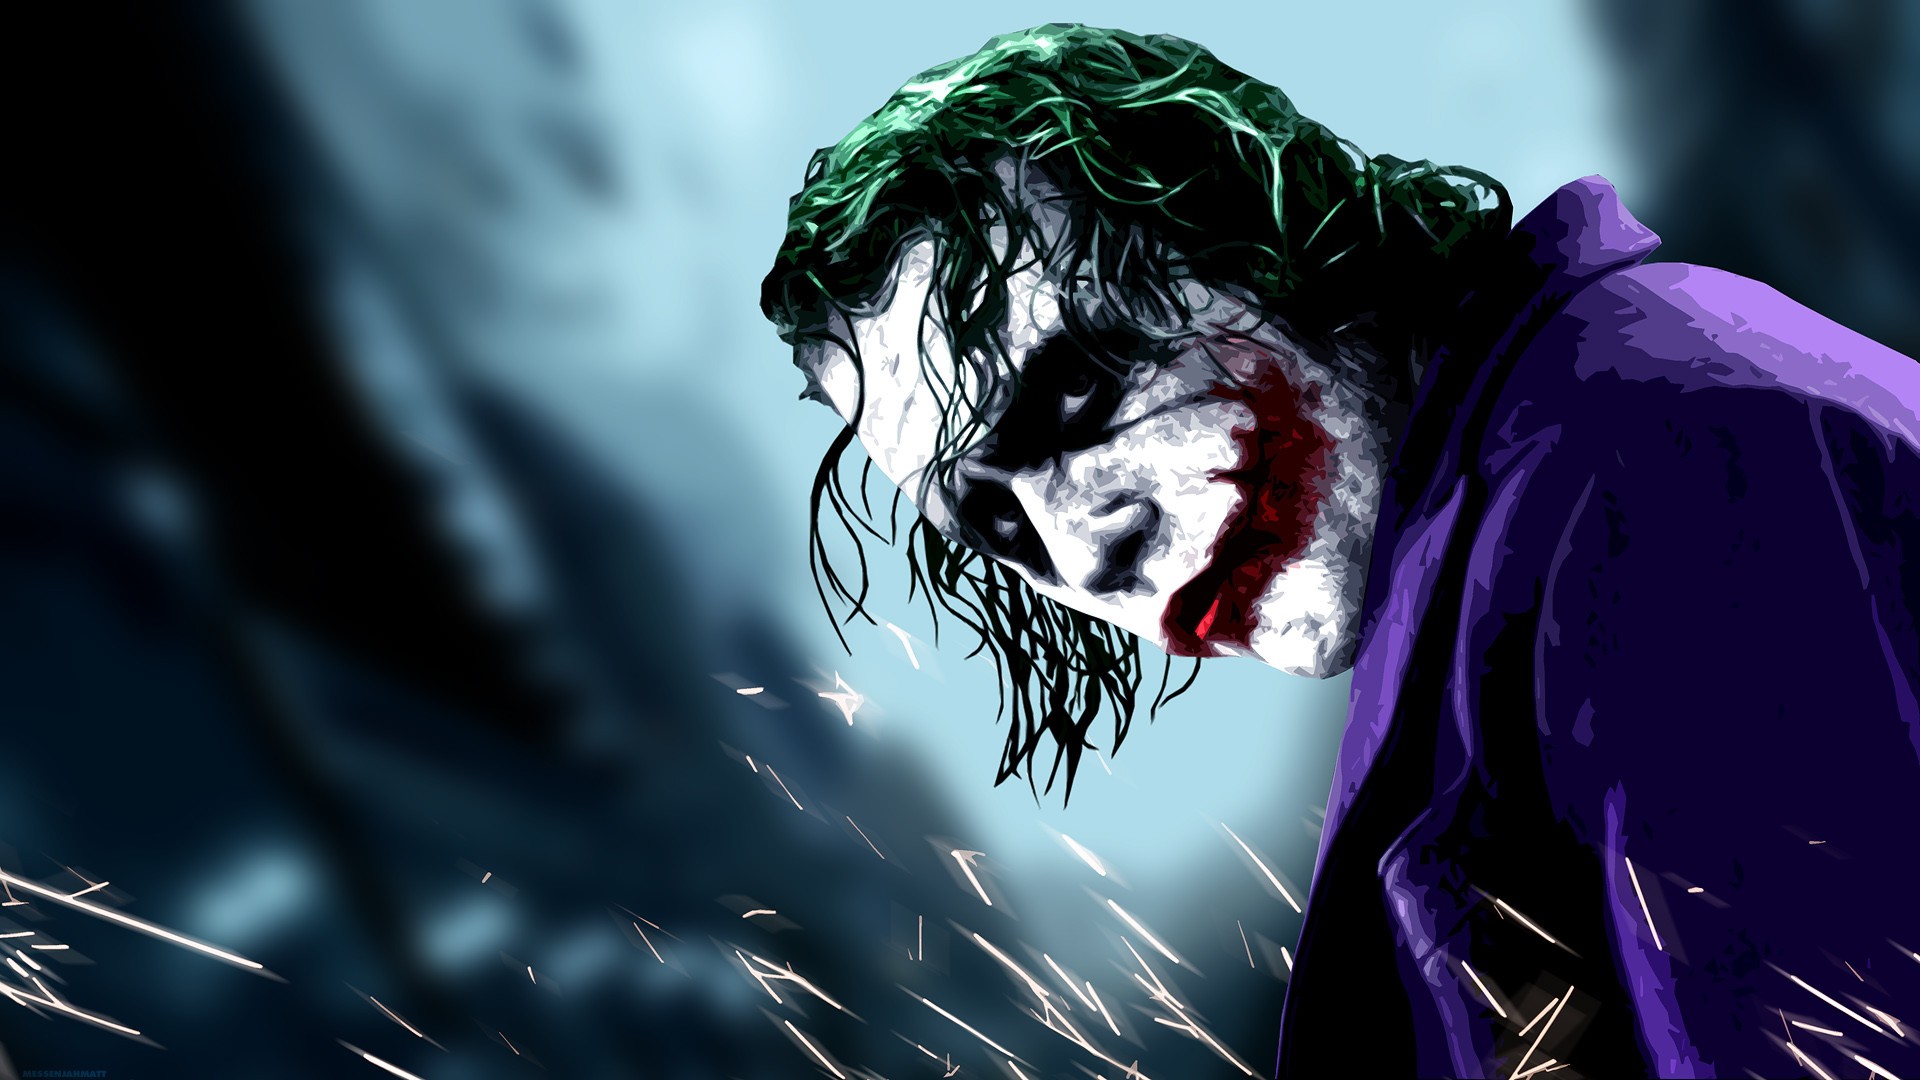 1024x768 Joker Hd 1024x768 Resolution Hd 4k Wallpapers Images Backgrounds Photos And Pictures